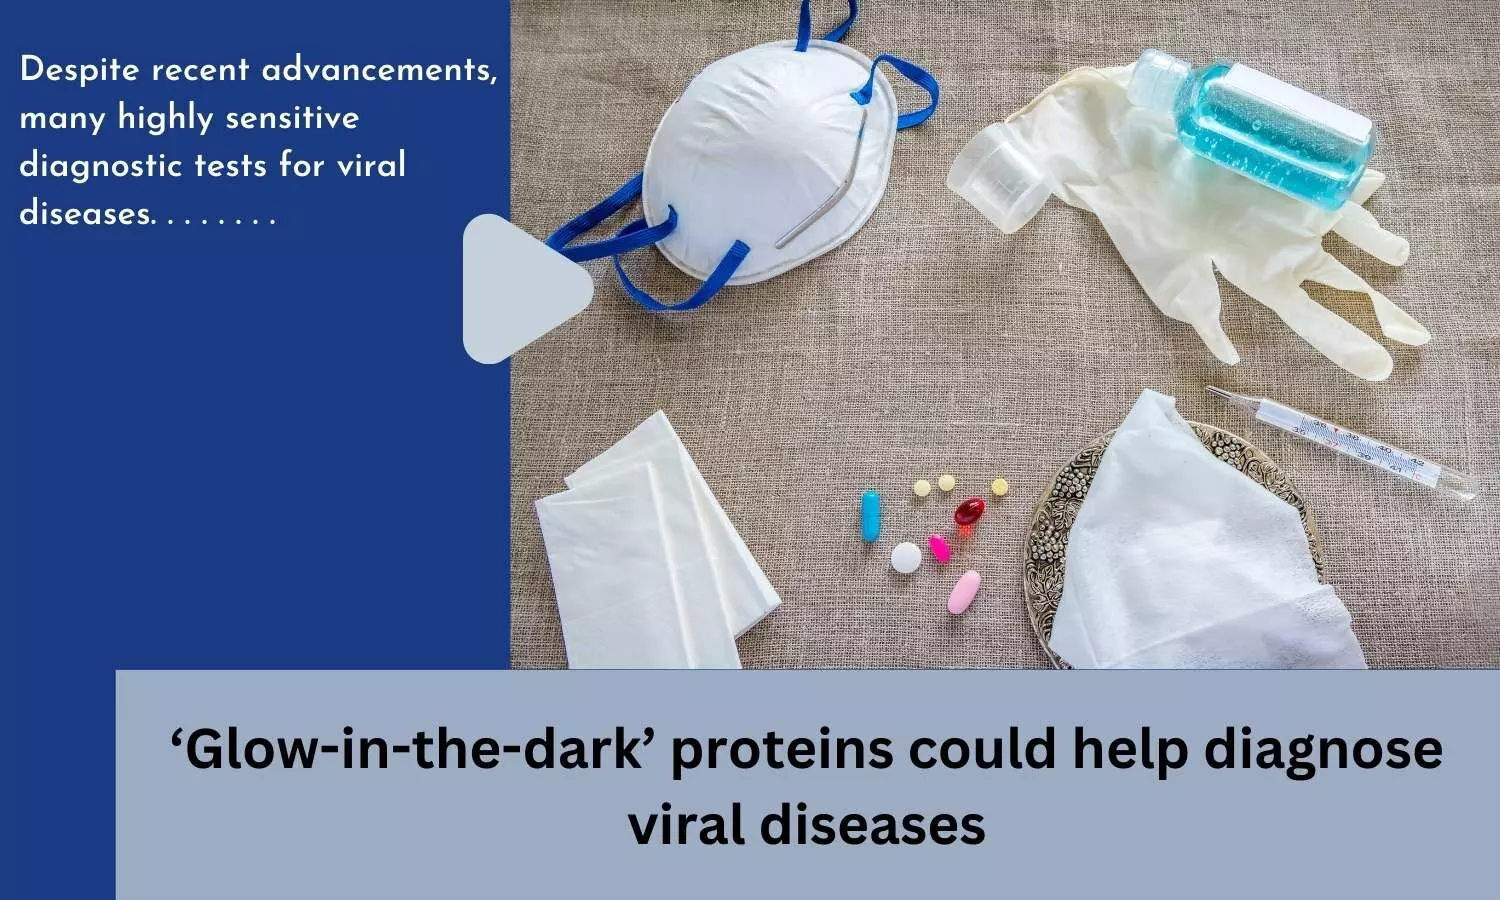 Glow-in-the-dark proteins could help diagnose viral diseases